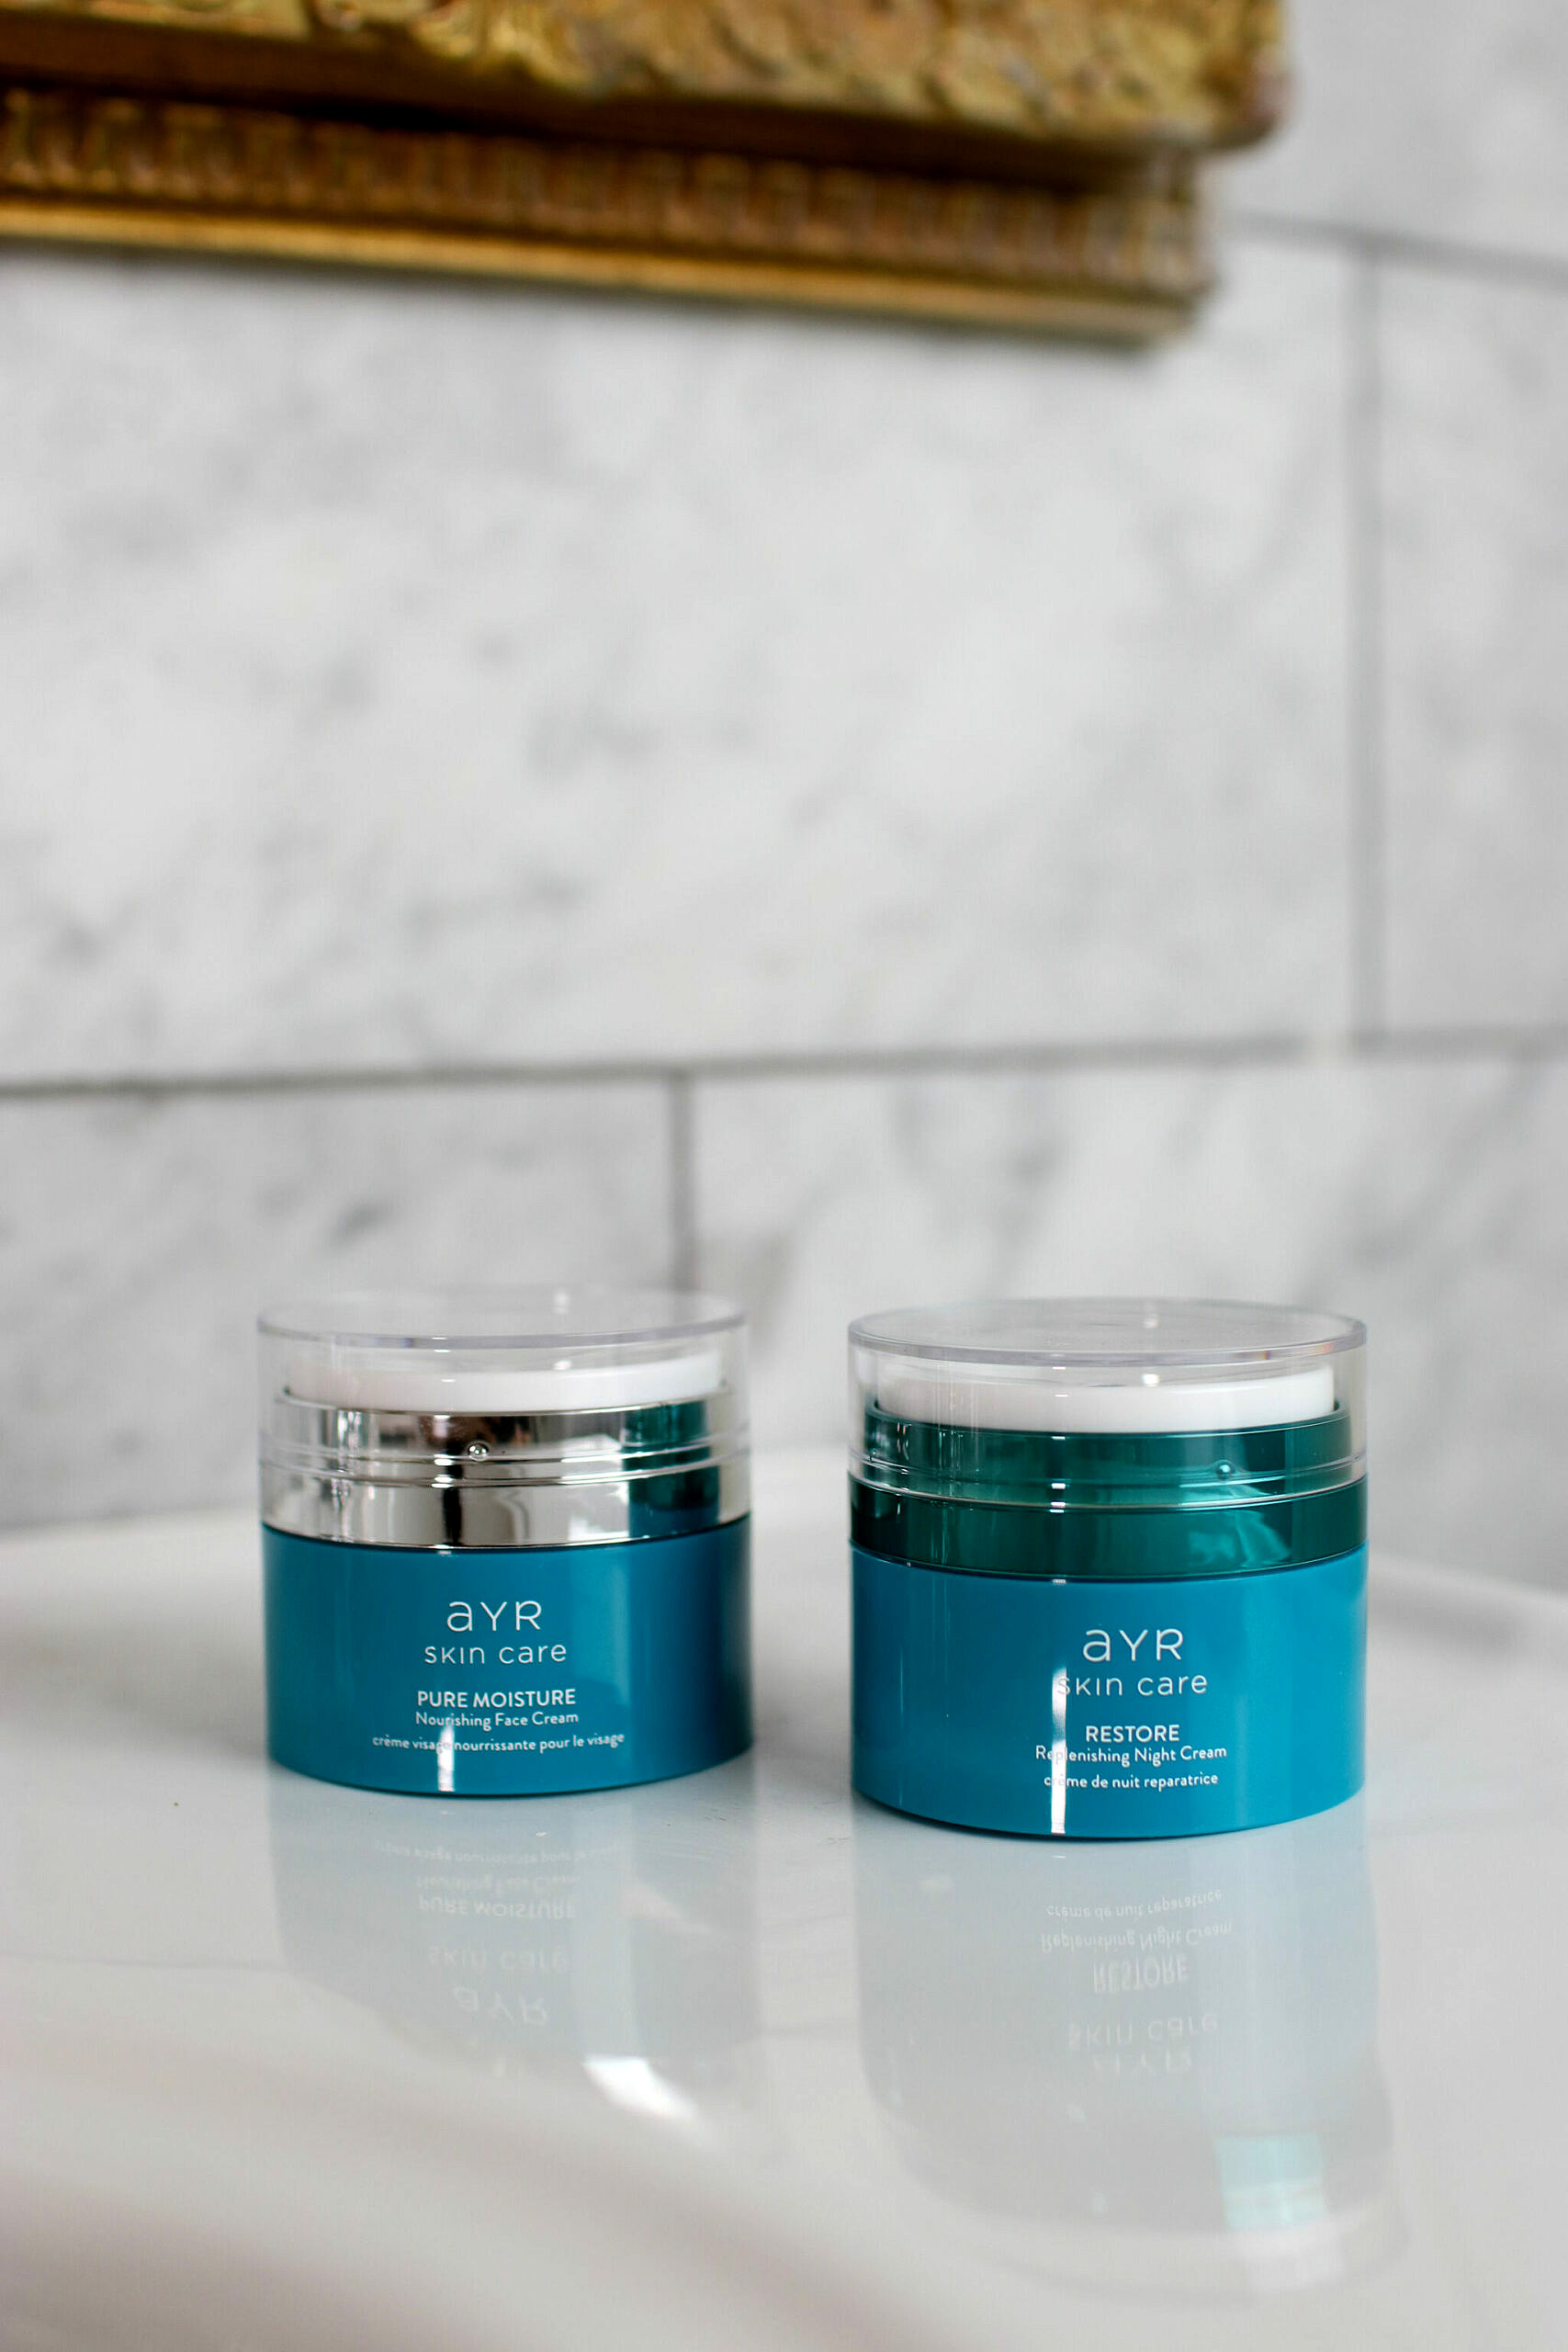 AYR Skincare Products | Organic and Carefully Sourced Natural Ingredients | Pure Moisture Nourishing Face Cream and Restore Replenishing Night Cream